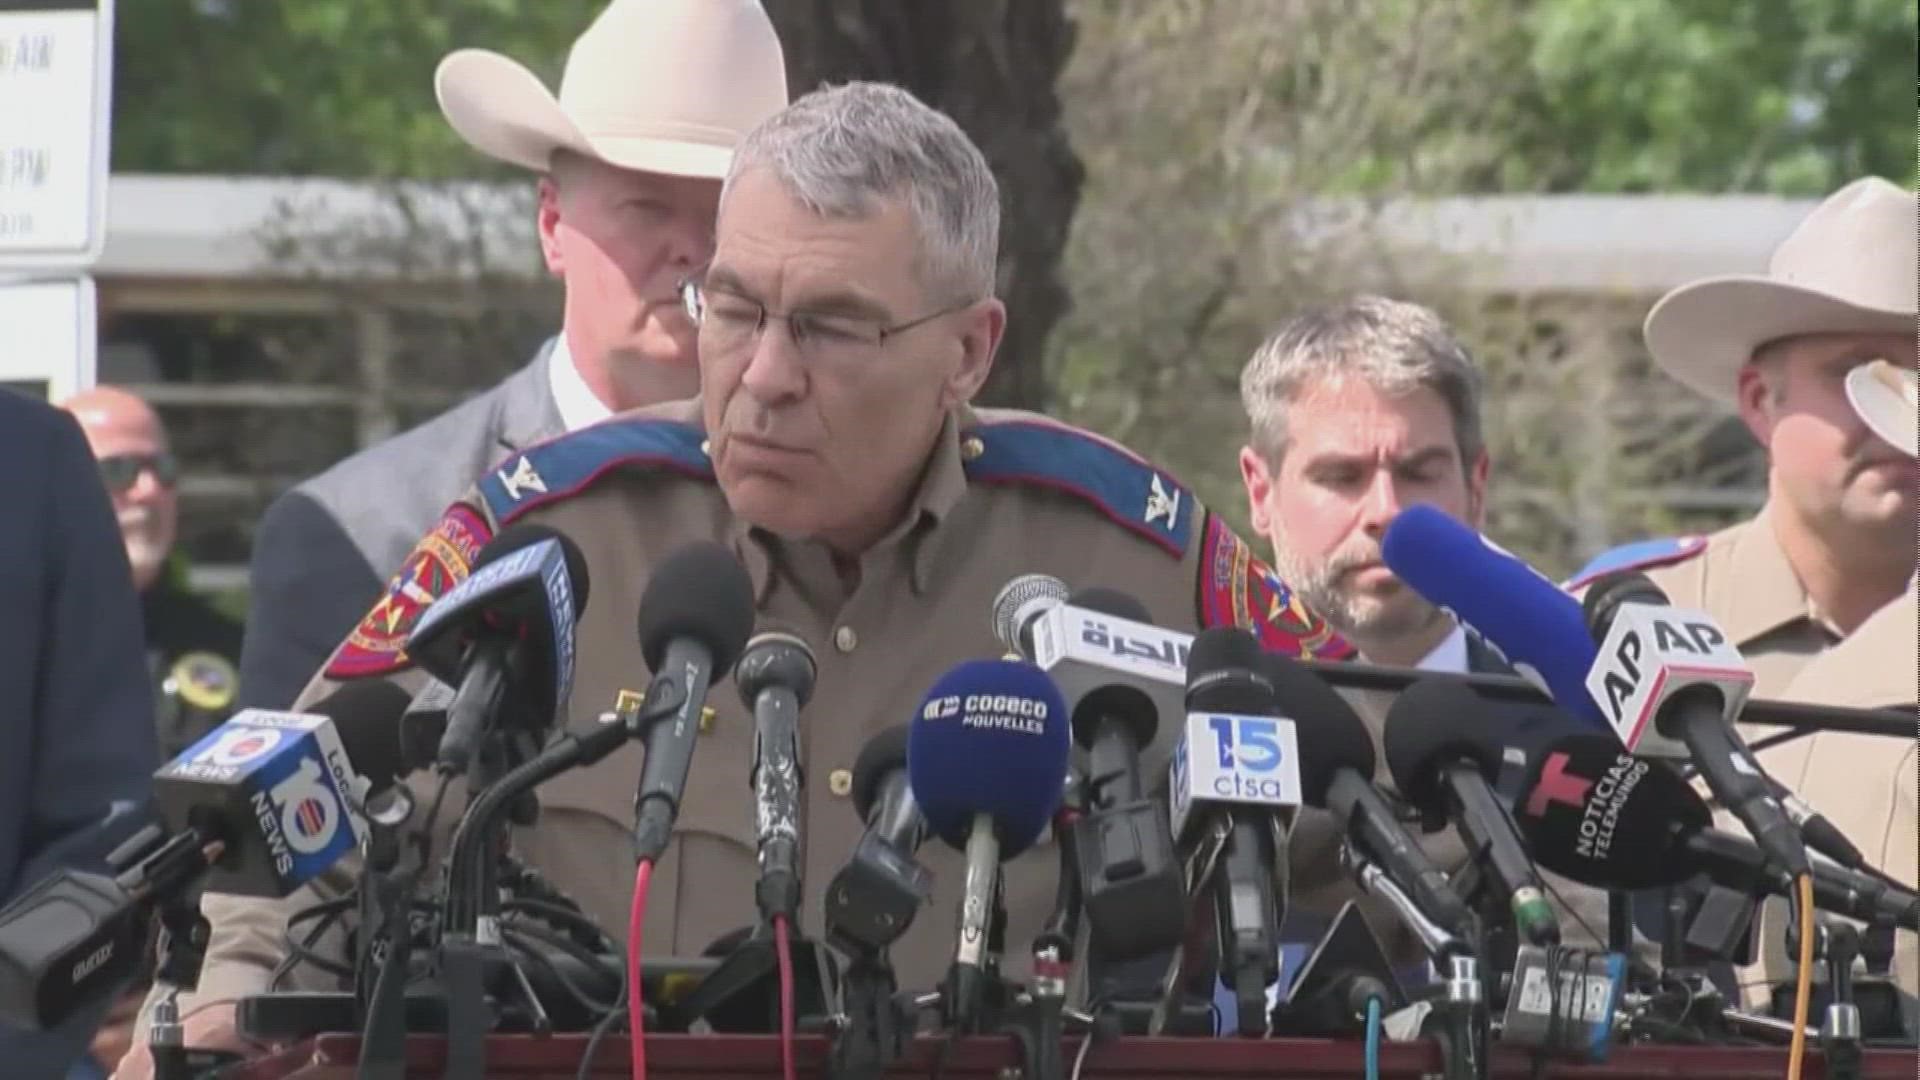 Texas DPS Director Steven C. McCraw gave the latest timeline of events from the Uvalde, Texas, elementary school shooting.